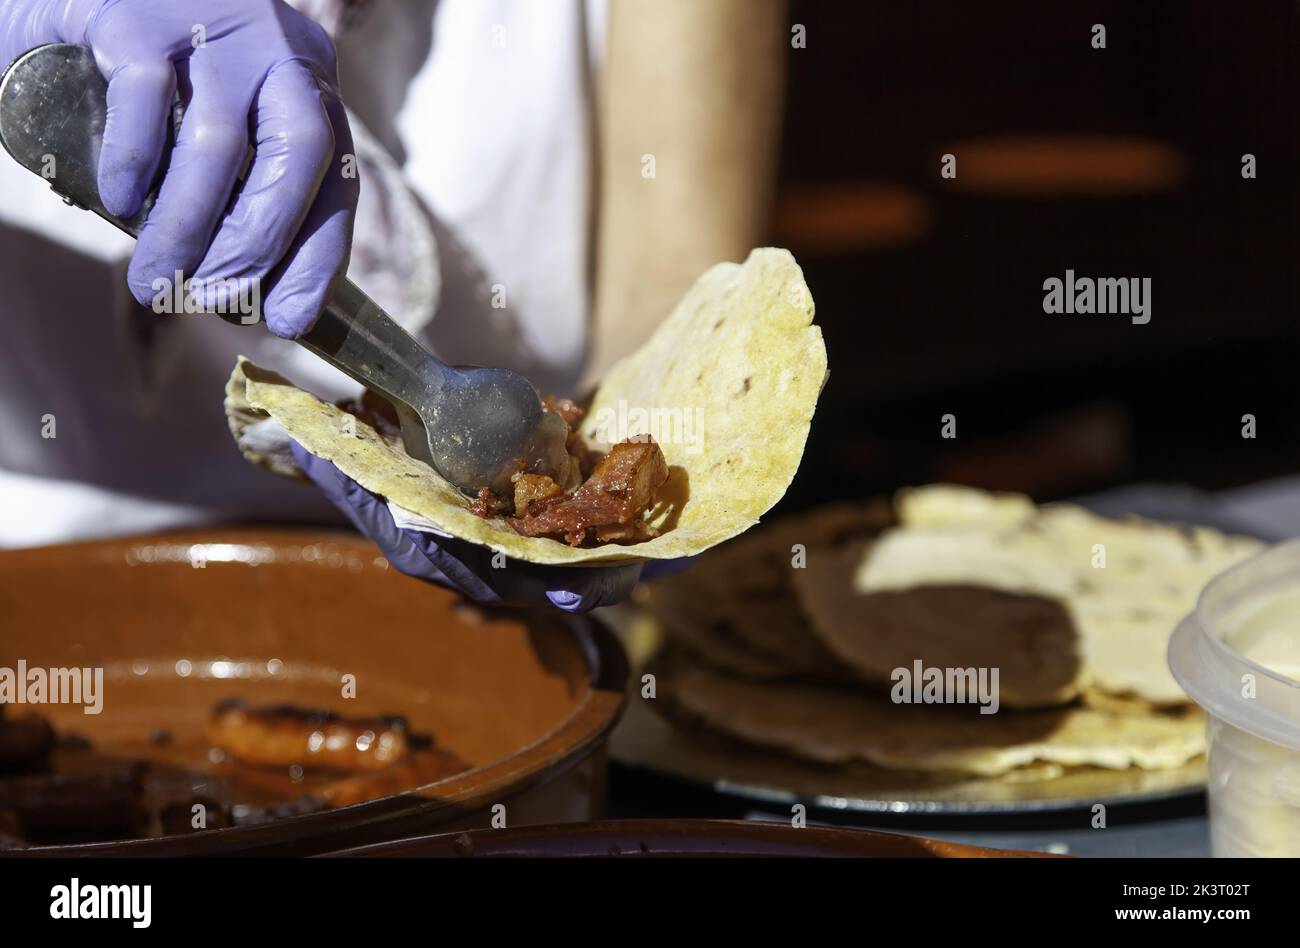 Snak of Sausage and meat in restaurant, fast food manufacturing Stock Photo